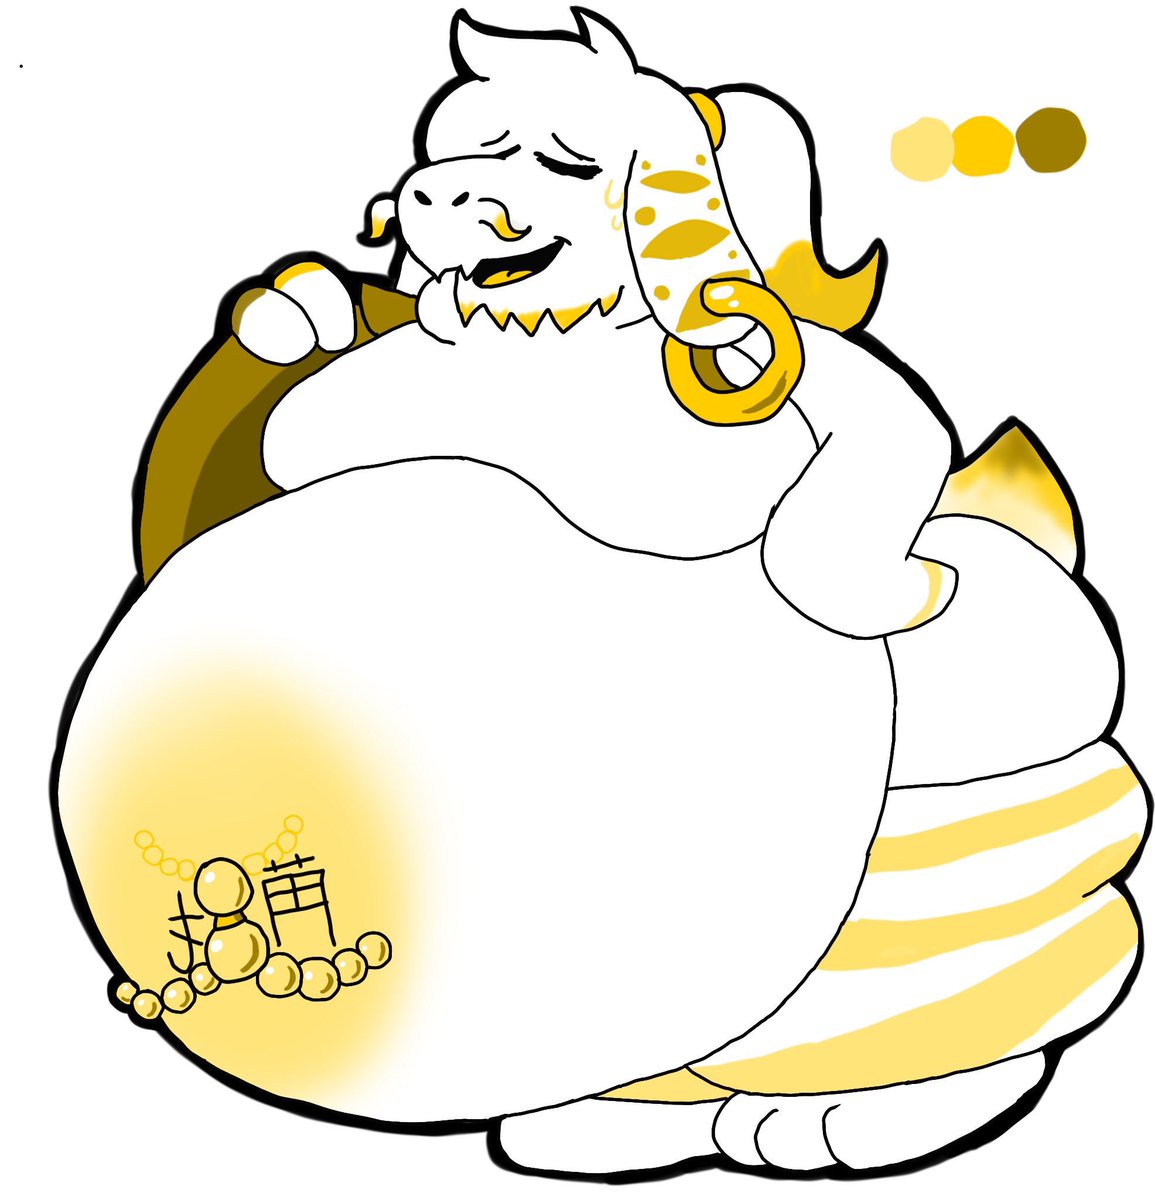 @SphericalFoxsky @ArtSuneBlake Have fun with whatever he’ll be fused with >w>